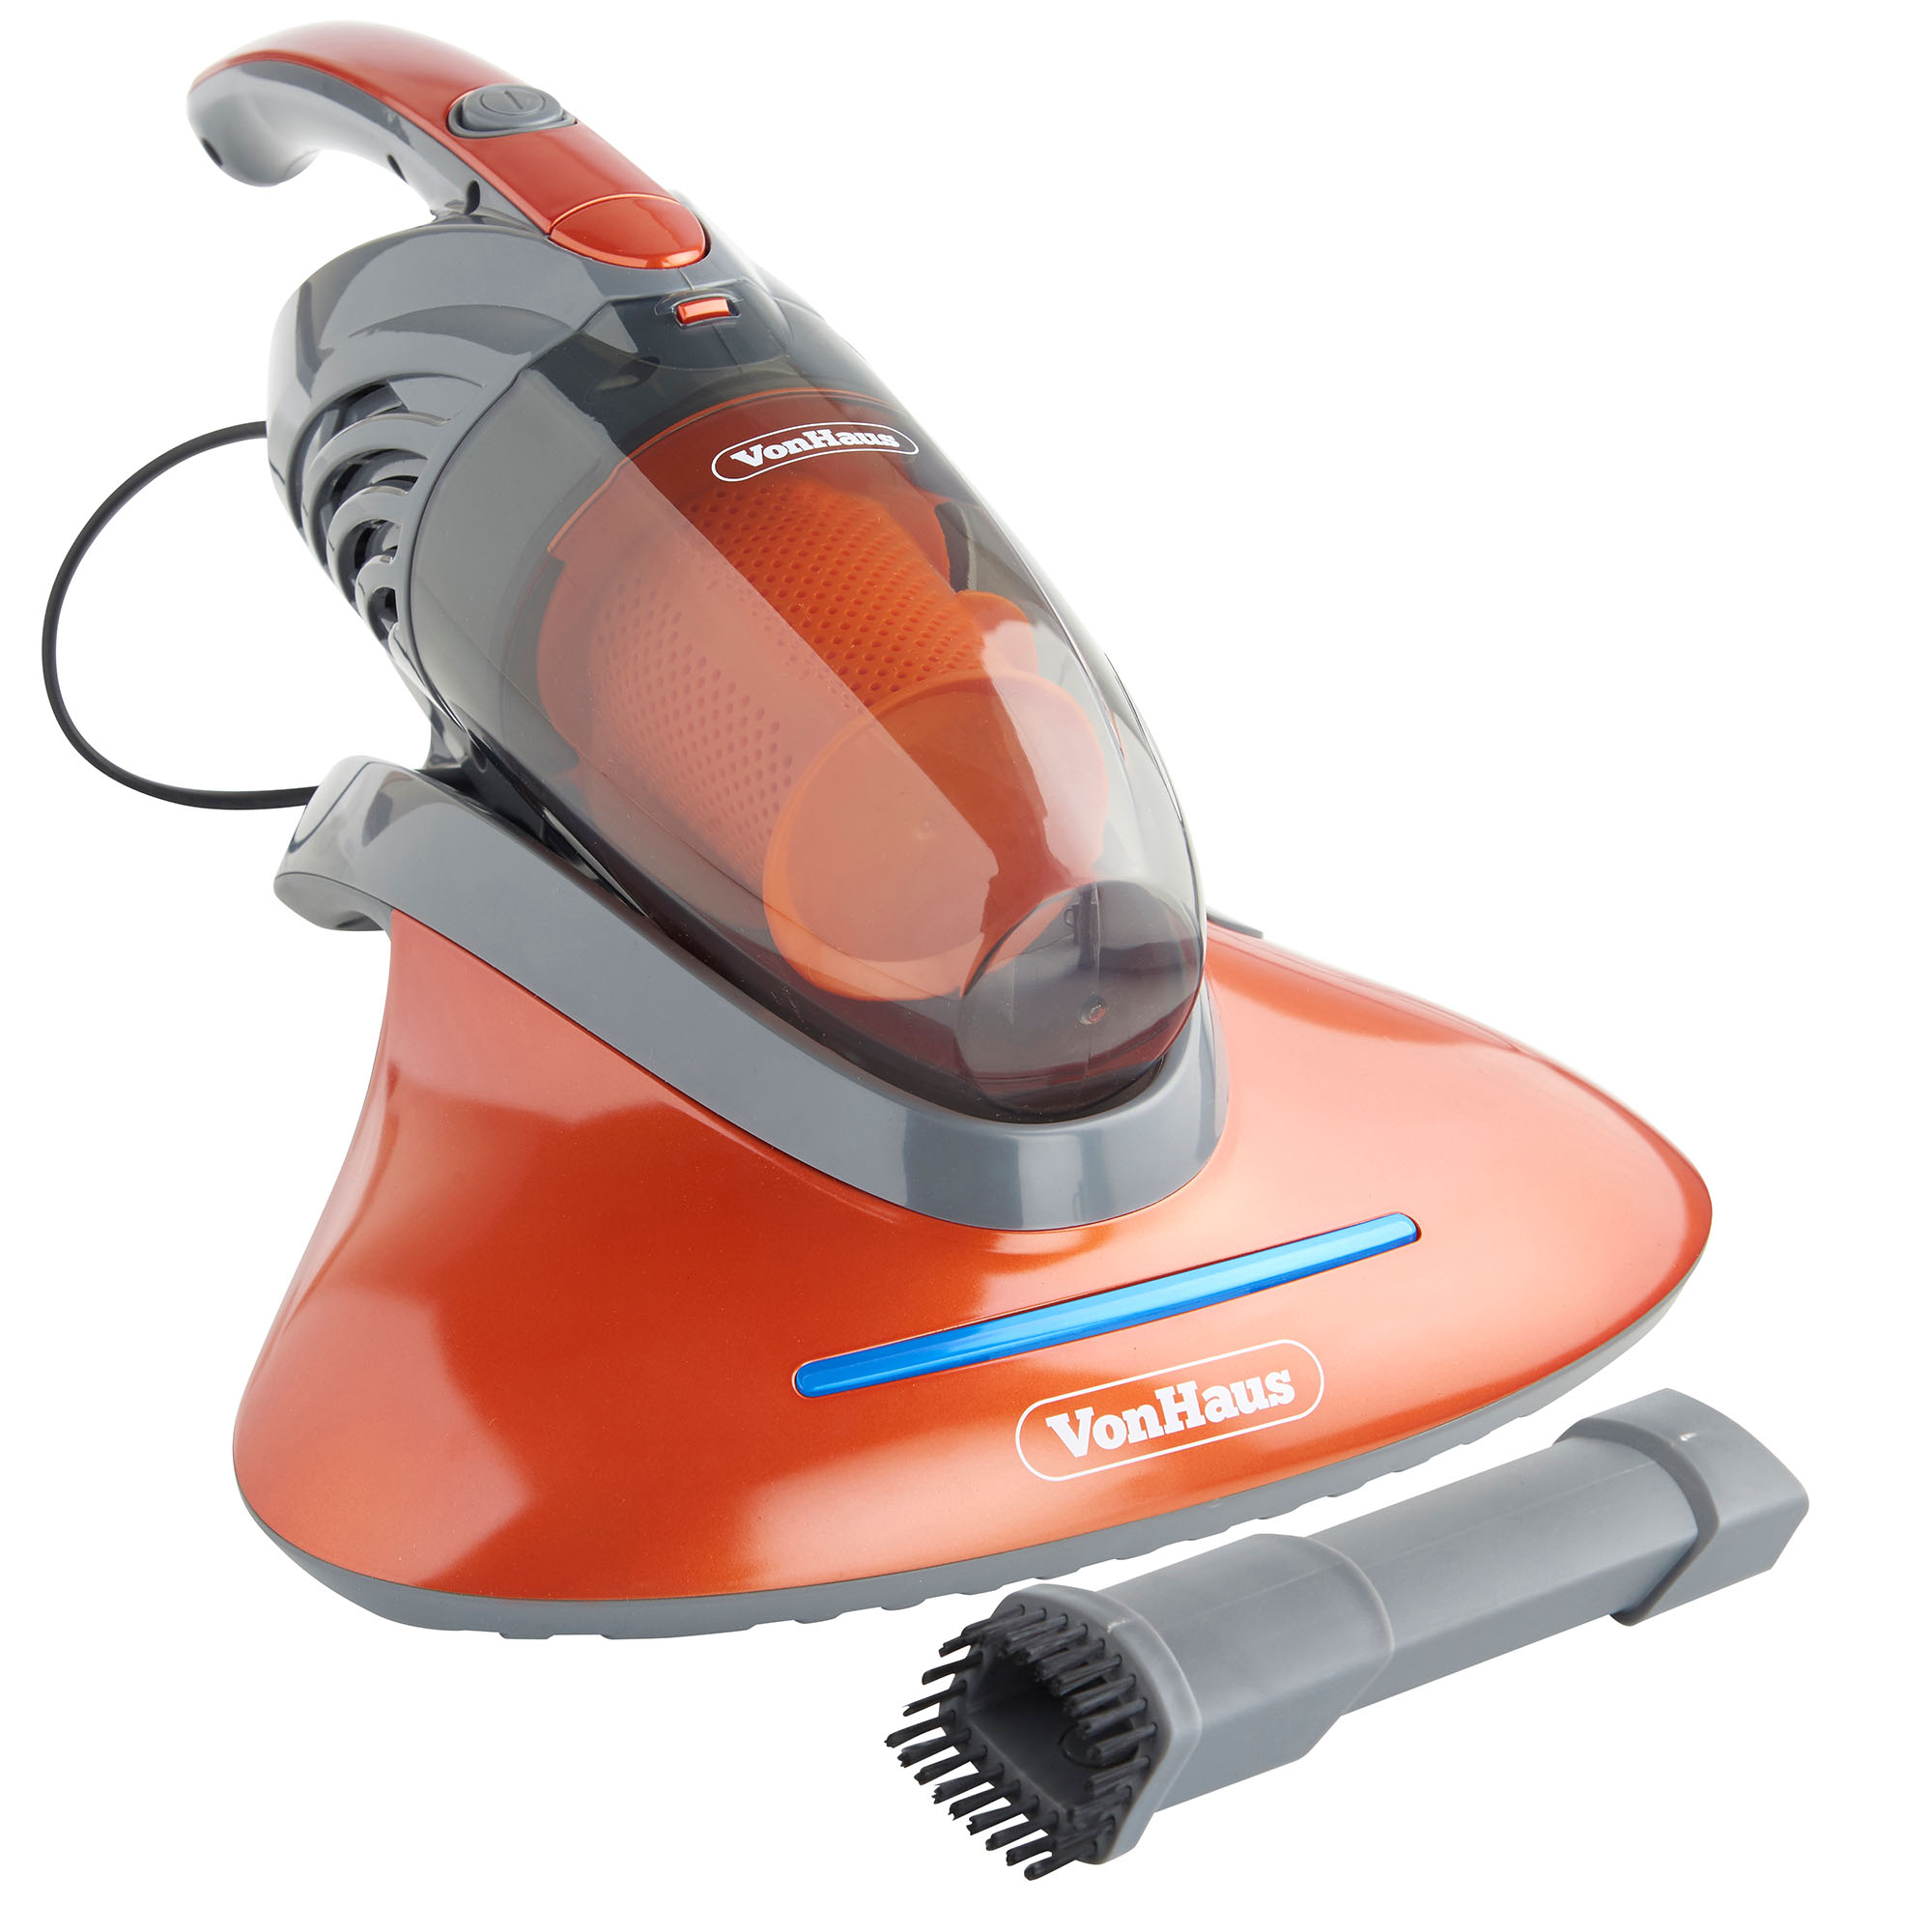 Tips for maintaining Uv Vacuum Cleaner